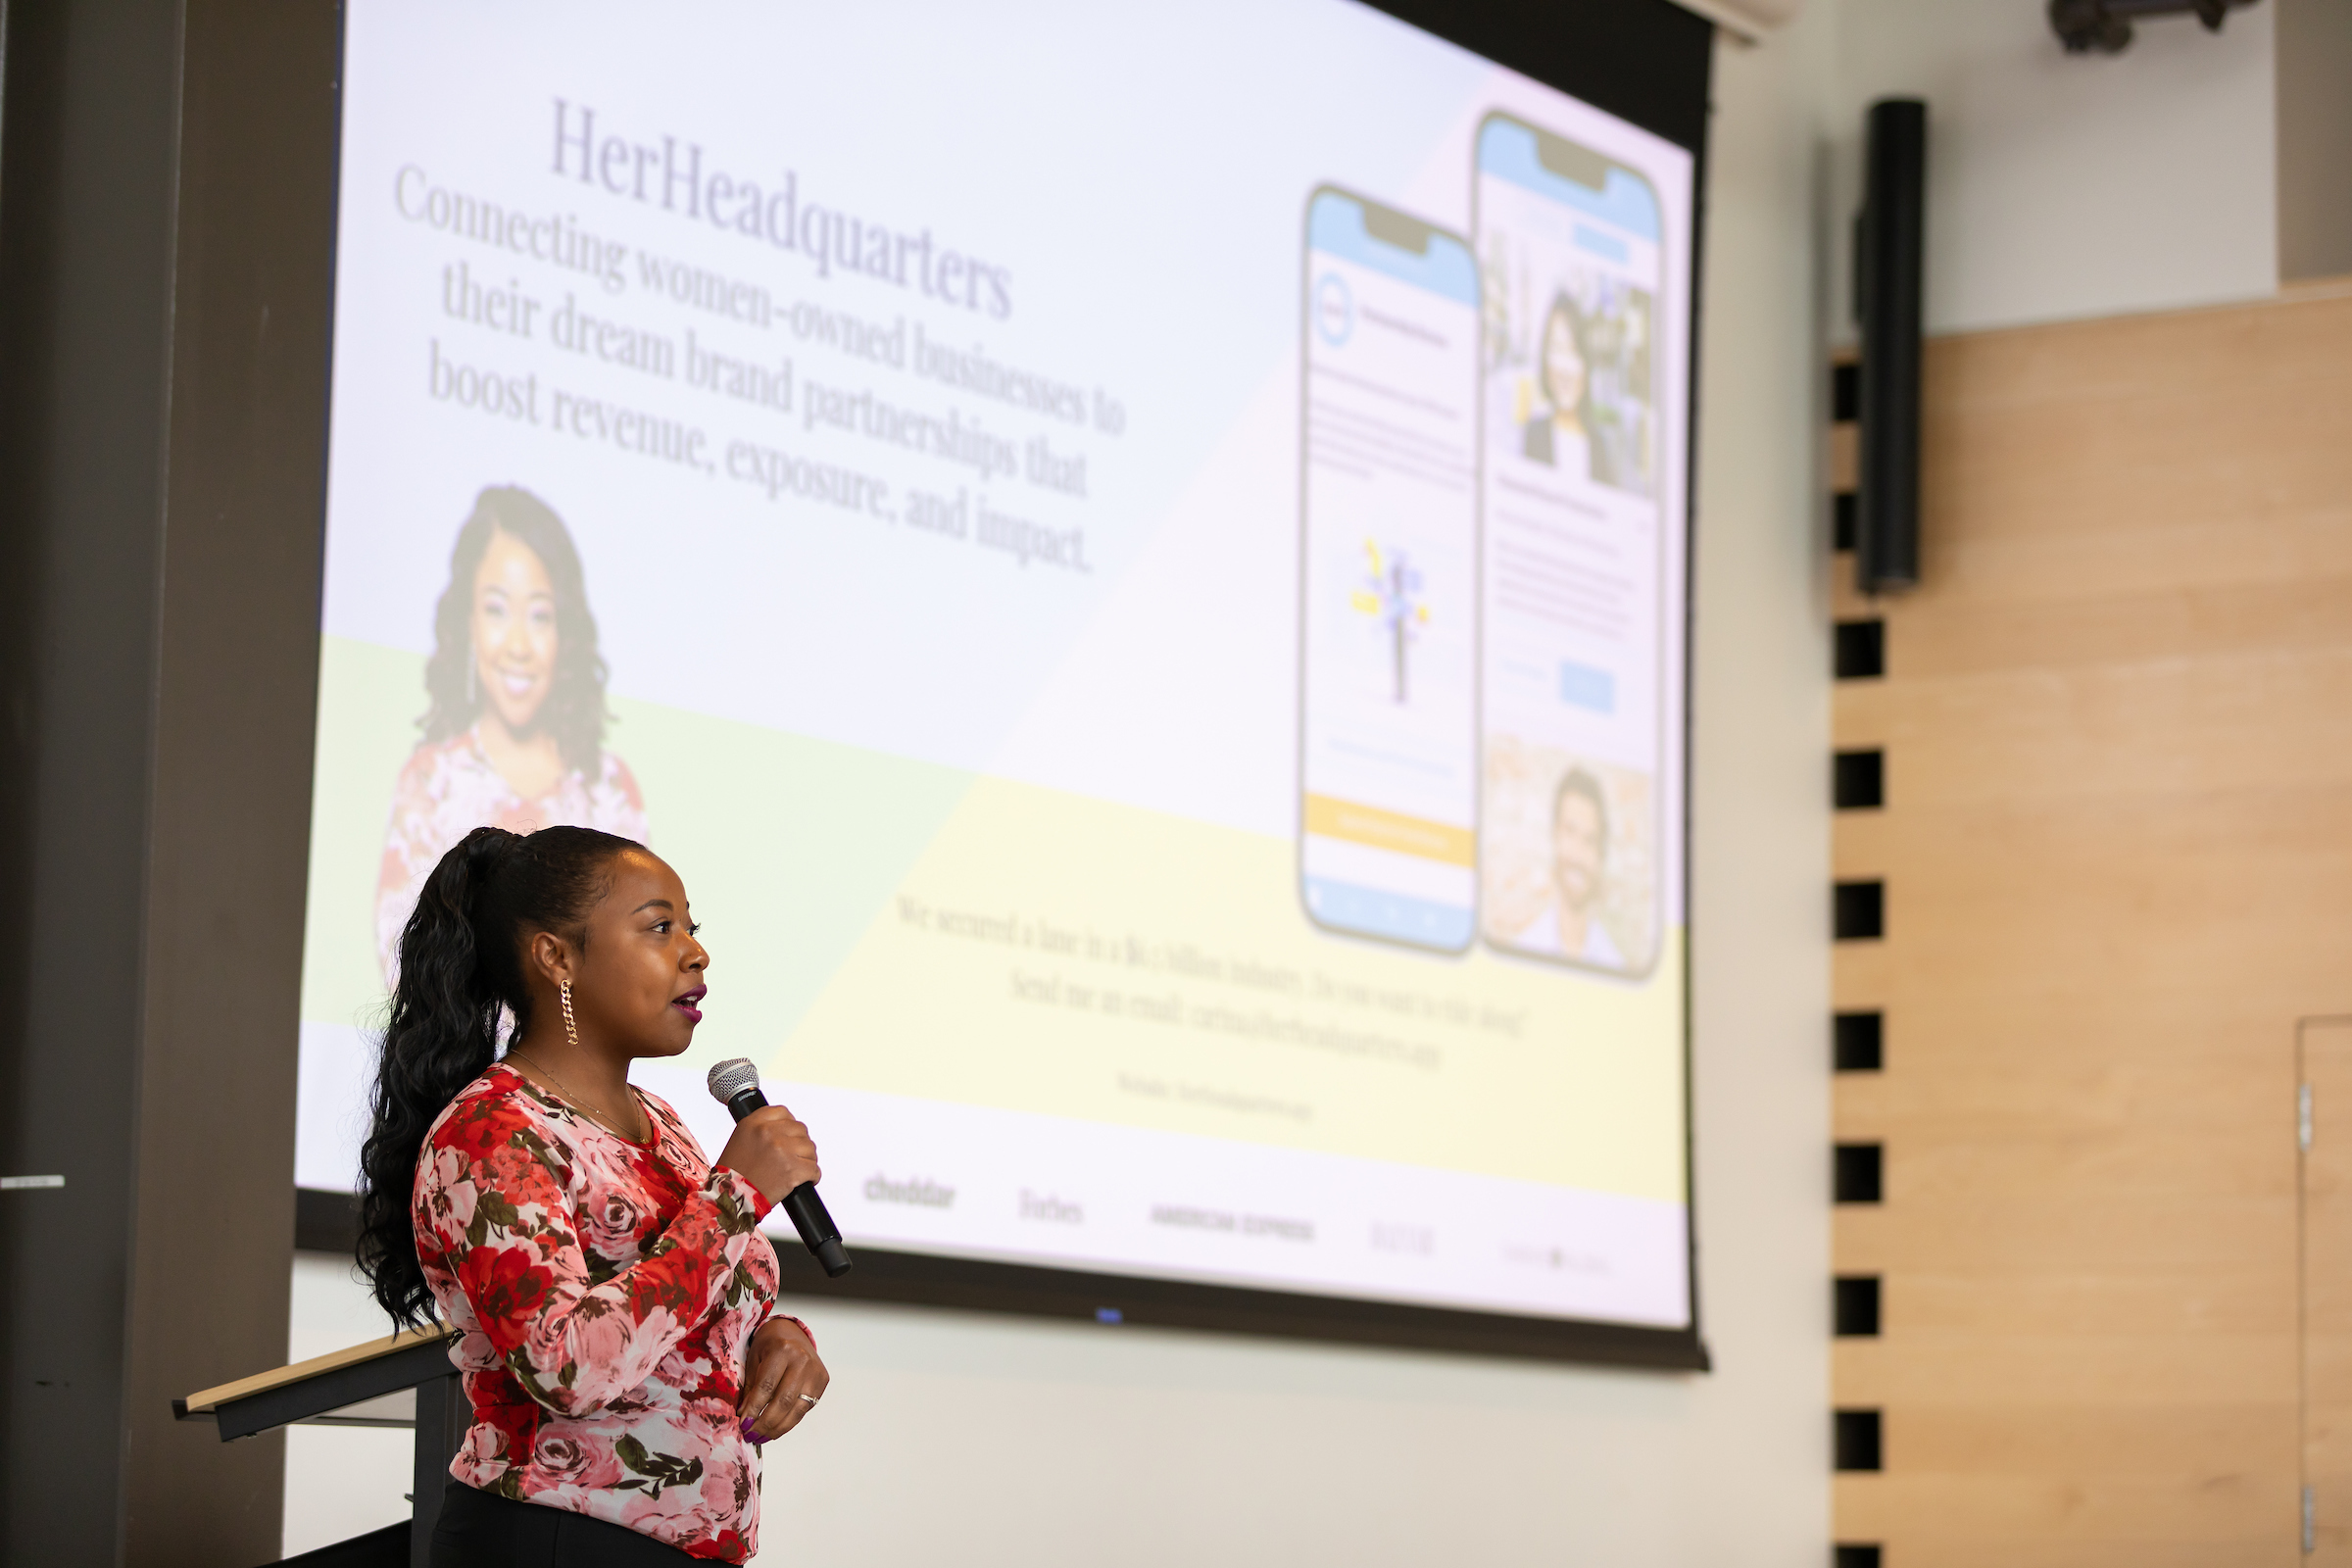 Carina Glover, owner of HerHeadquarters, presents her pitch